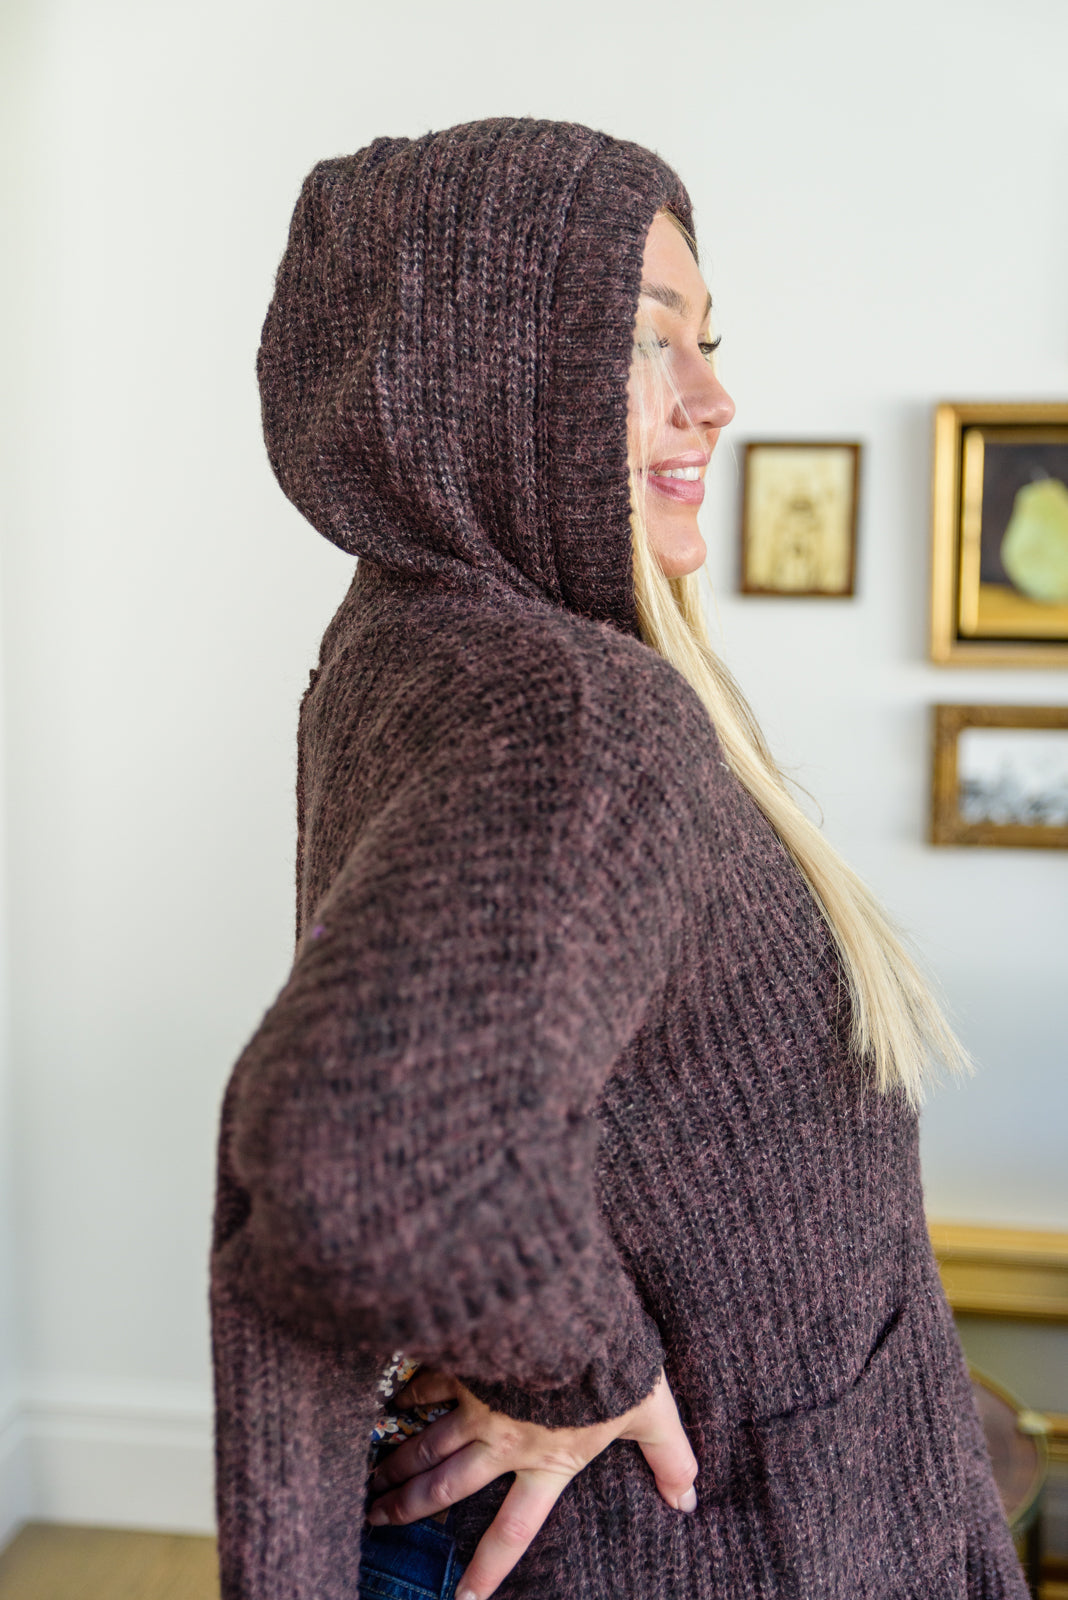 Views of Aspen Hooded Pull Over Sweater (Online Exclusive)